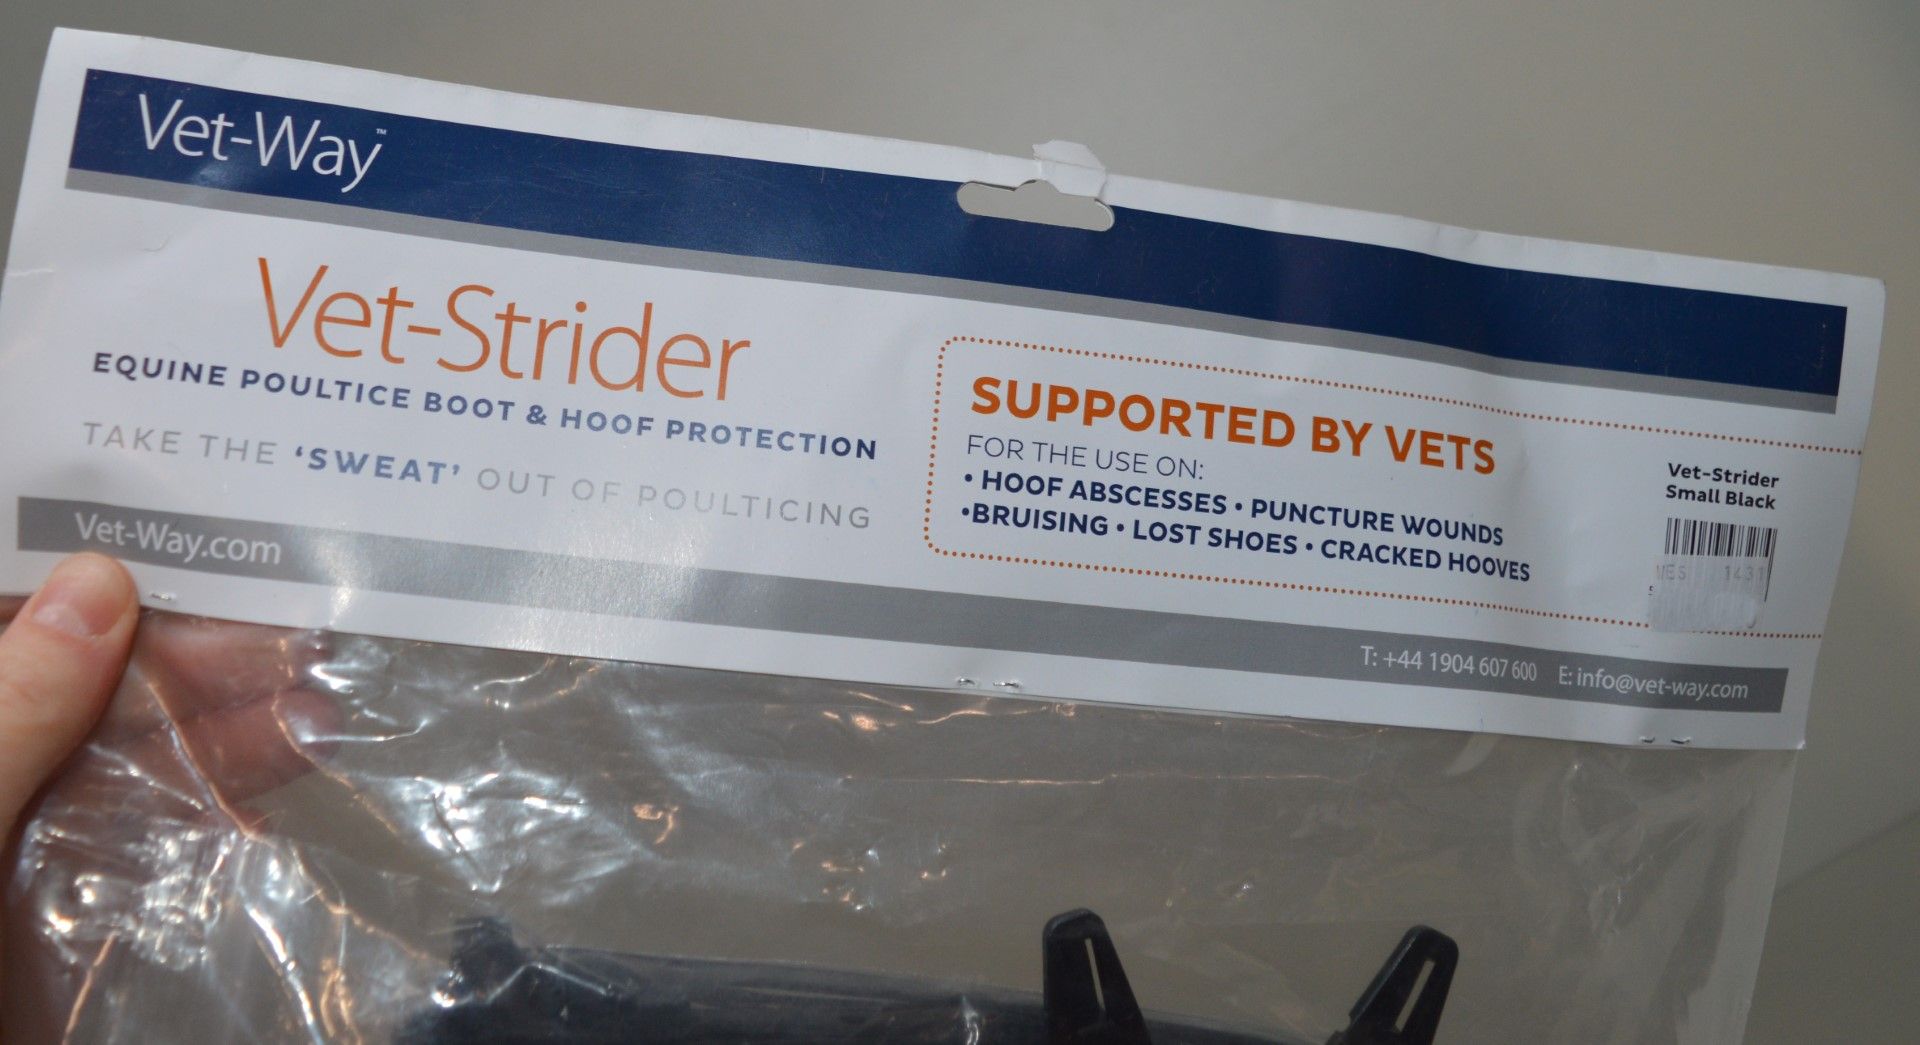 1 x Vet-Strider Equine Poultice Boot and Hoof Protection - CL401 - Suitable For Use on Hoof - Image 4 of 4